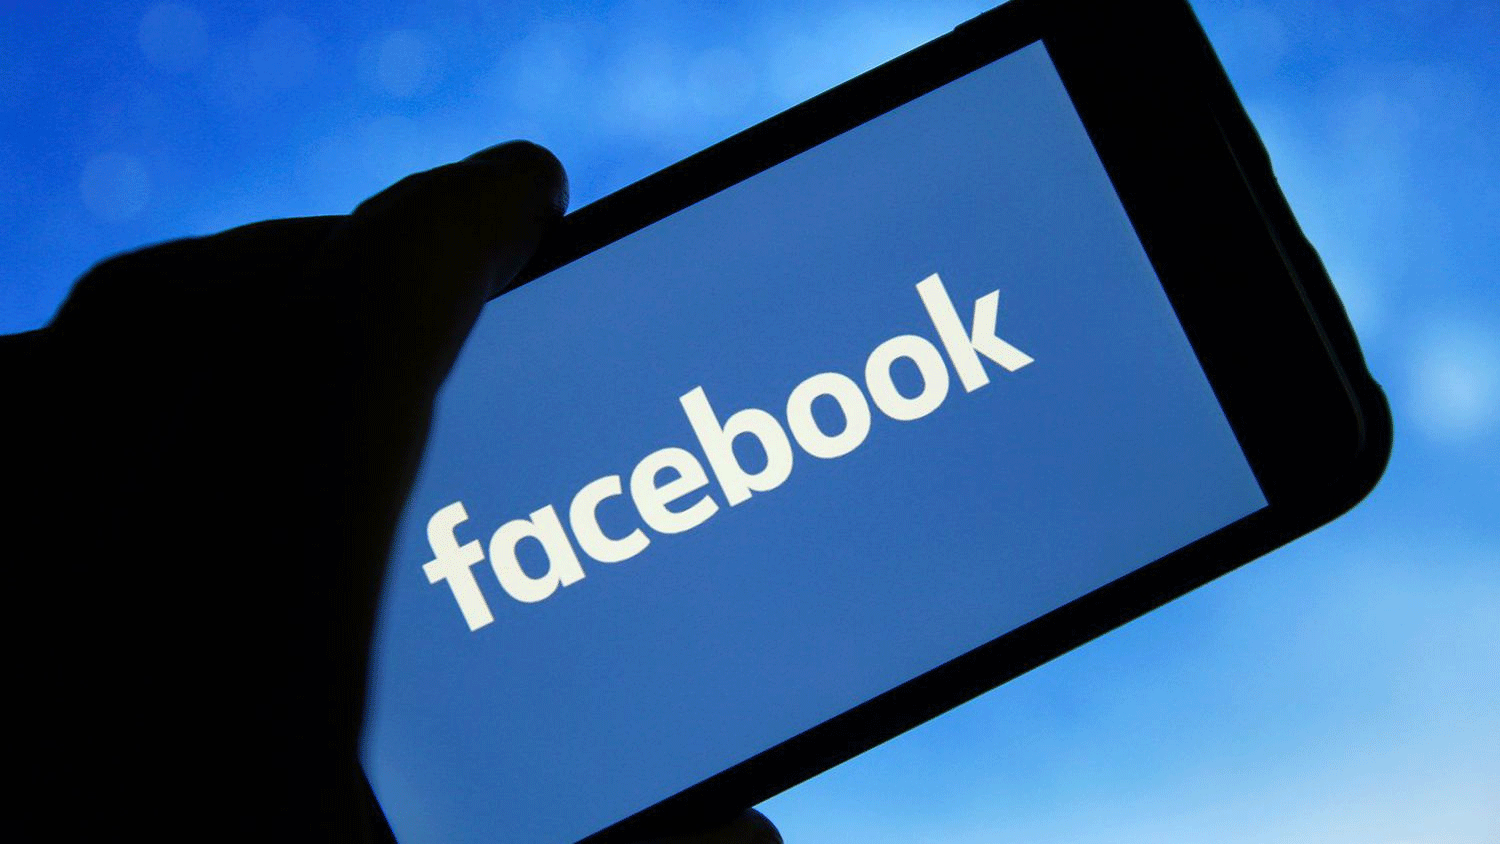 Plans begin to introduce Facebook with a new name